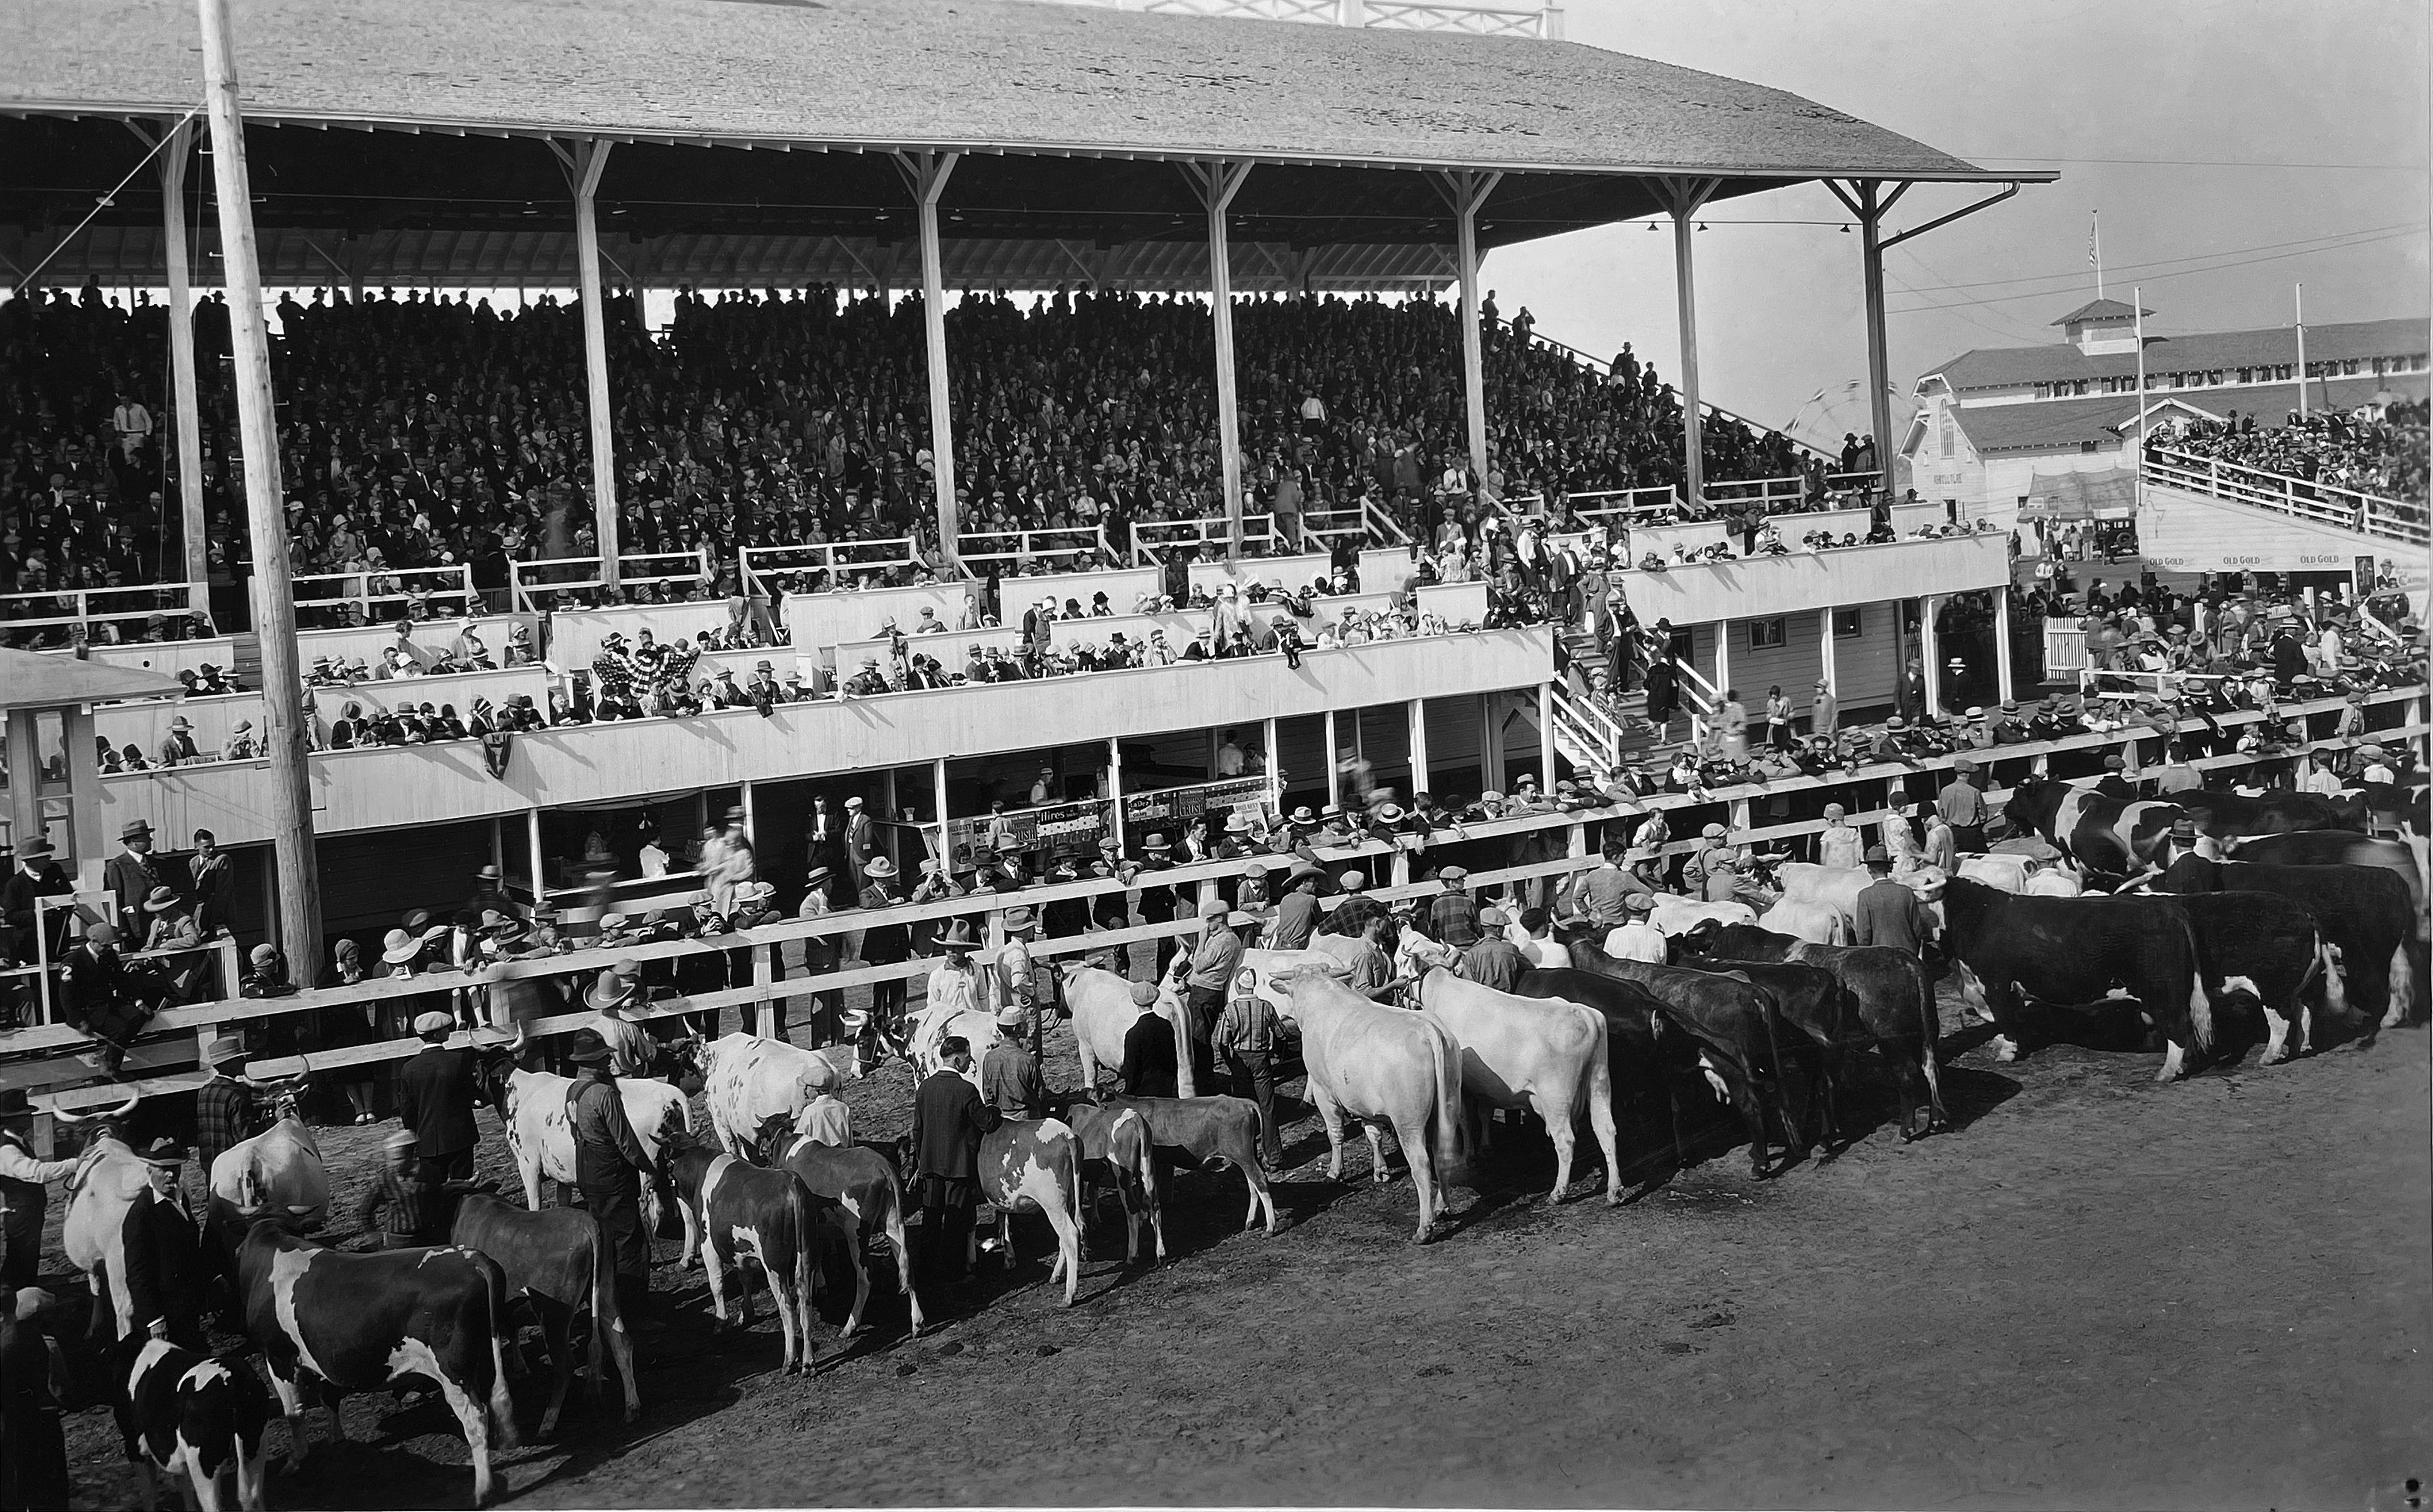 A historic black and white photo of the rodeo grandstands and arena with livestock lined up.